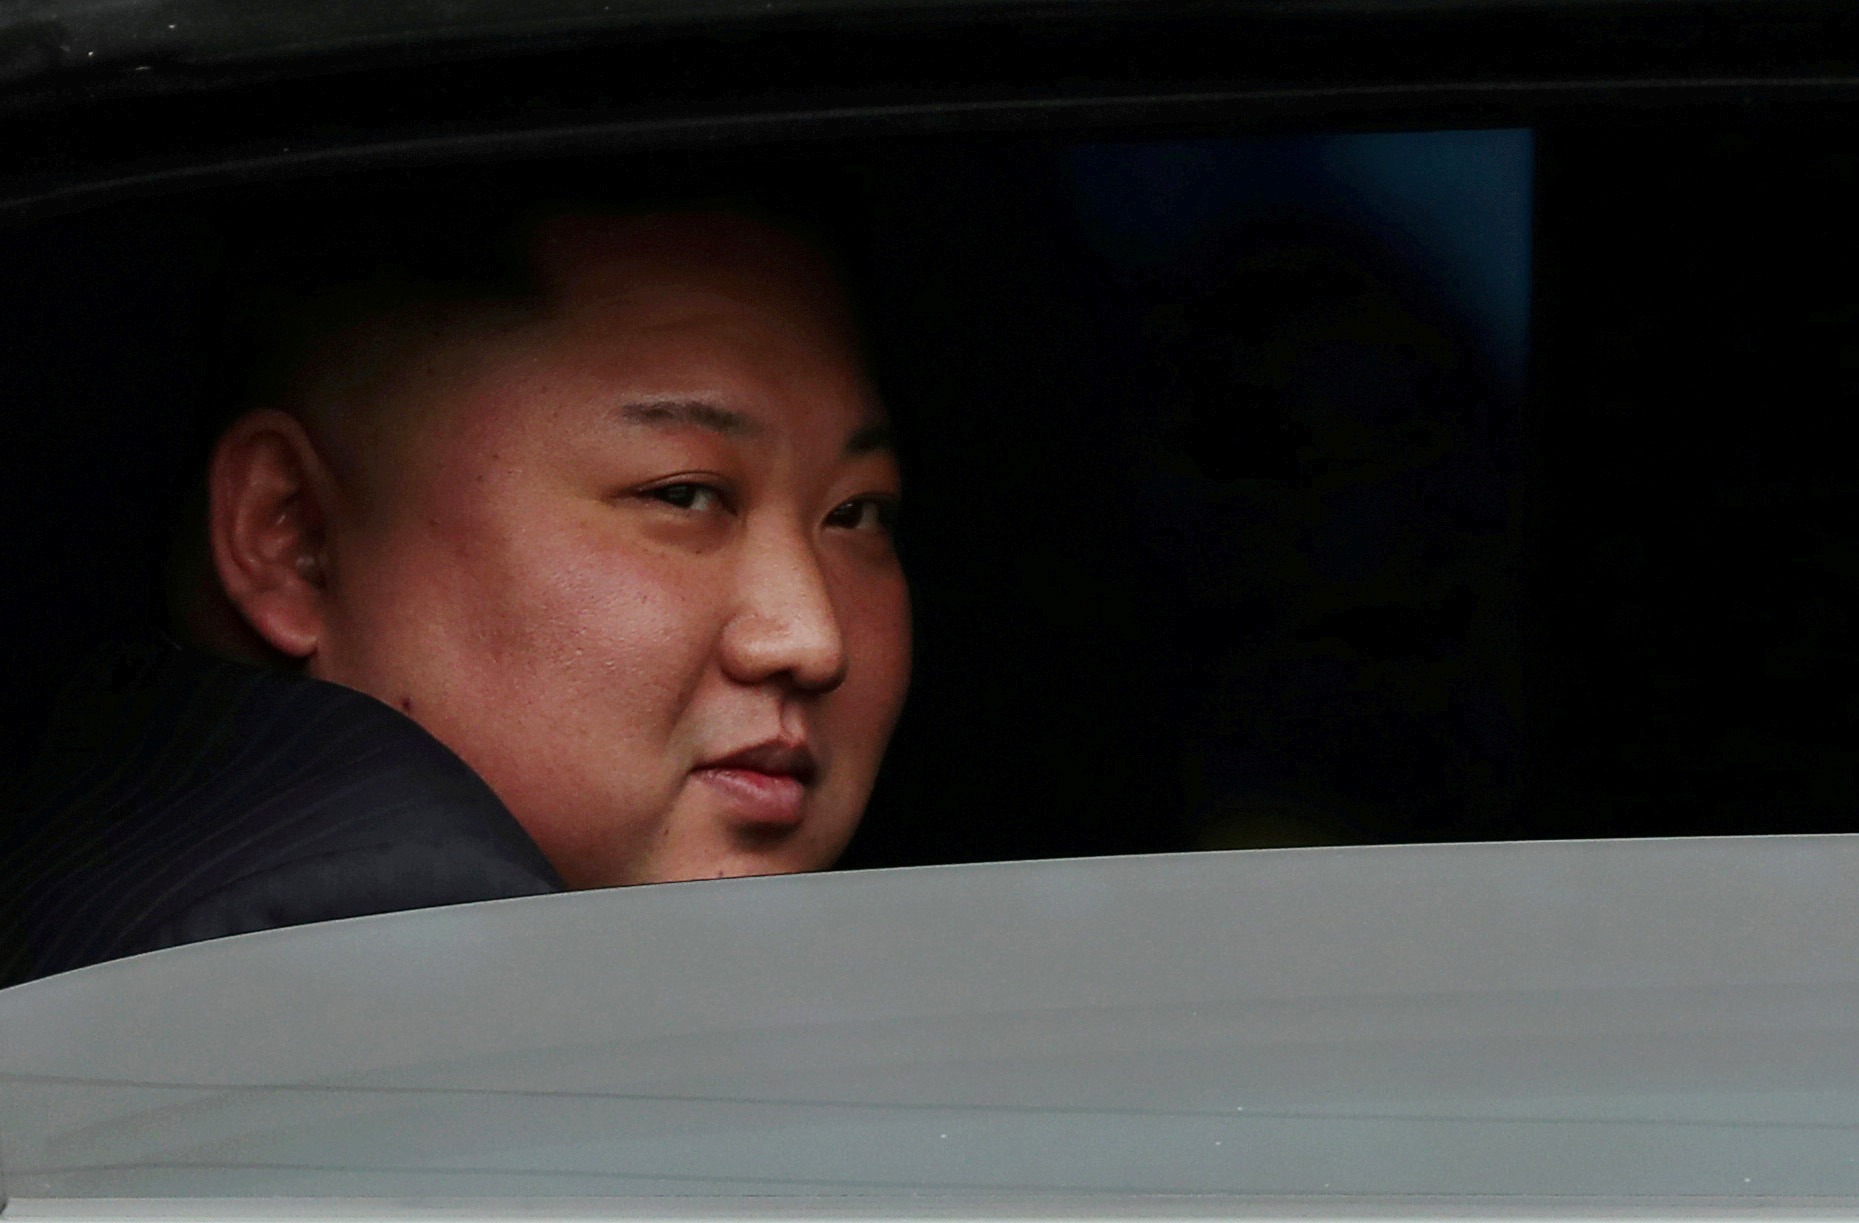 PHOTO: North Korea's leader Kim Jong Un sits in his vehicle after arriving at a railway station in Dong Dang, Vietnam, at the border with China, Feb. 26, 2019. 